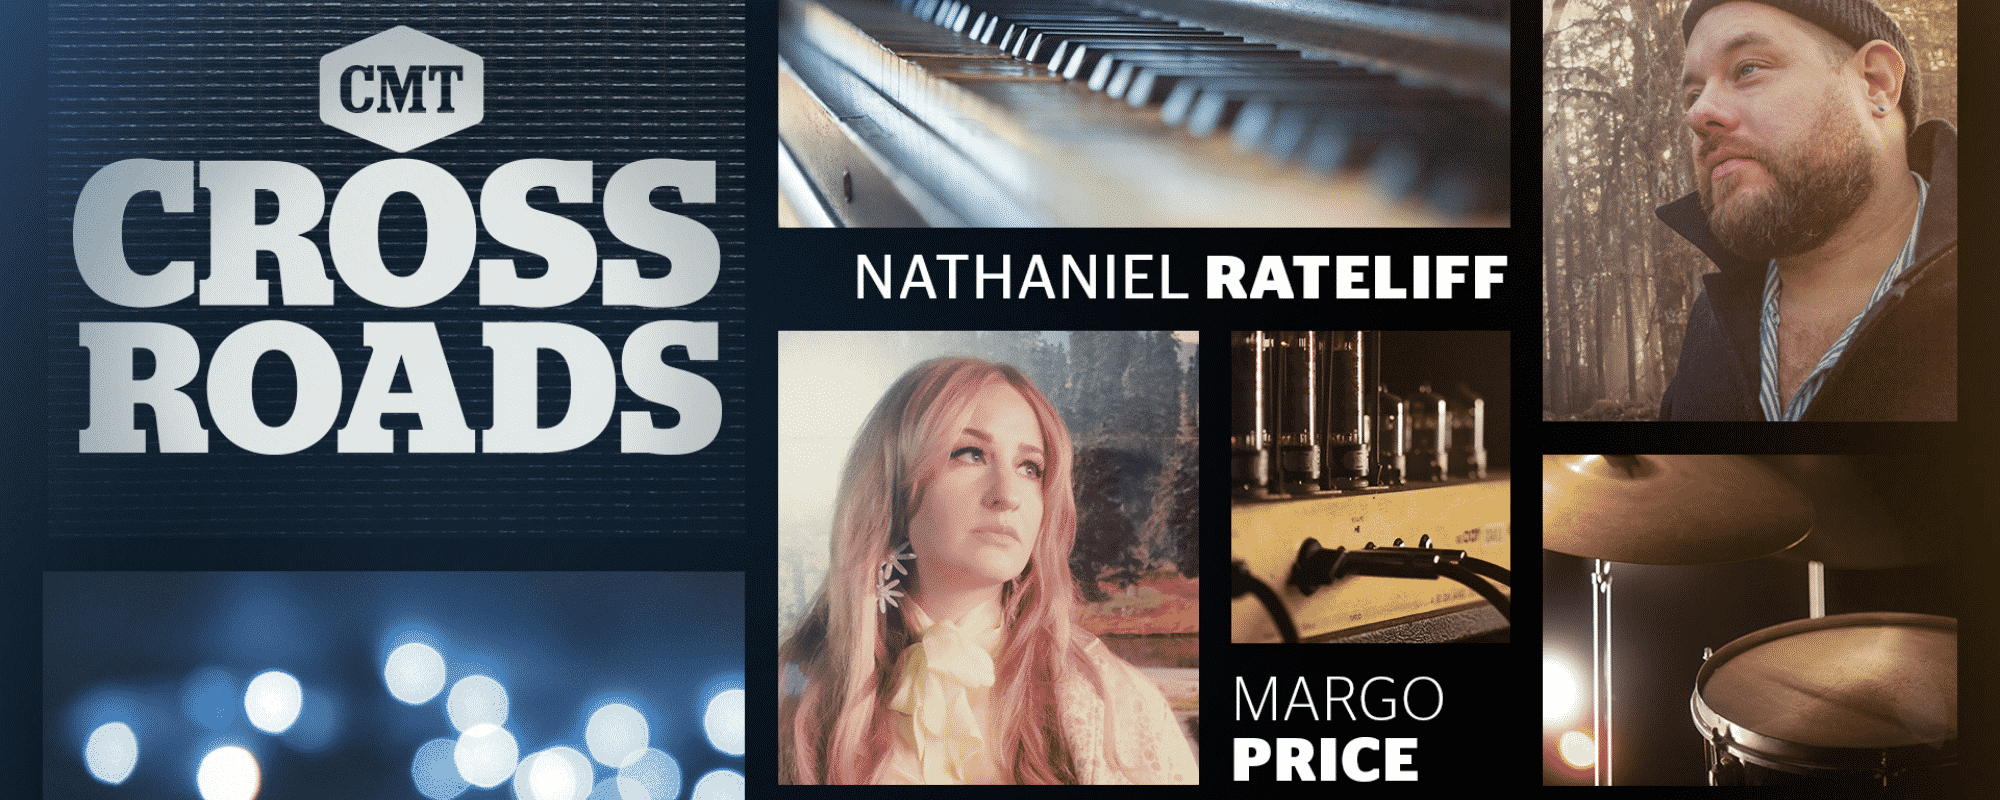 Nathaniel Rateliff and Margo Price Tease Their CMT Crossroads Debut with Soulful Performance of “Say It Louder”